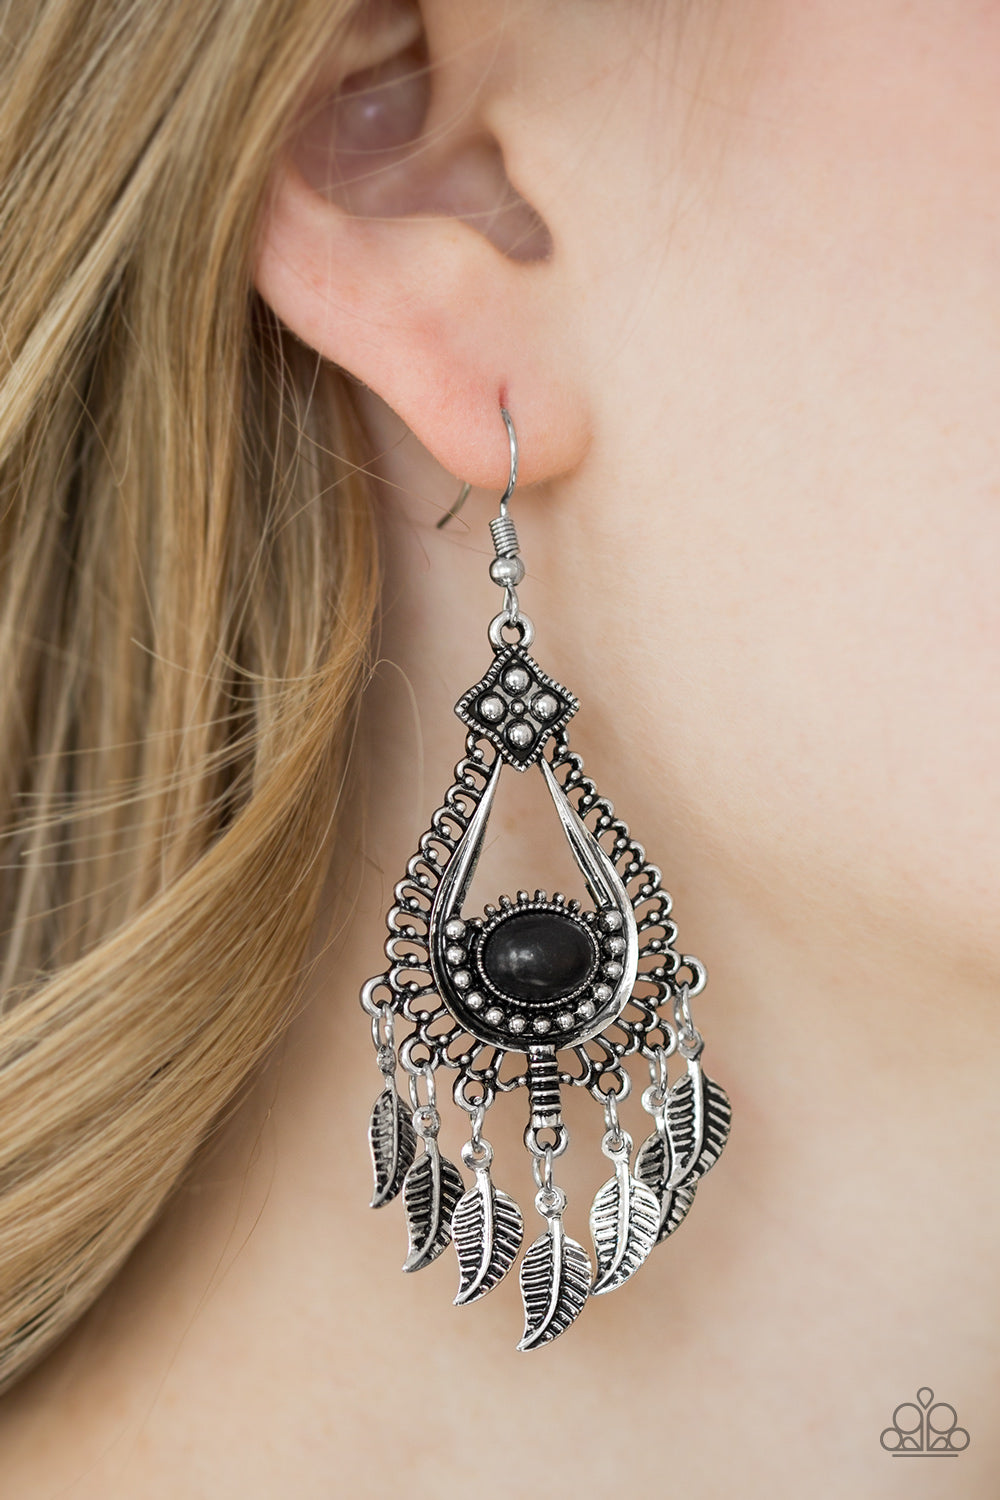 Paparazzi ♥ The FLIGHT Of Your Life - Black ♥  Earrings